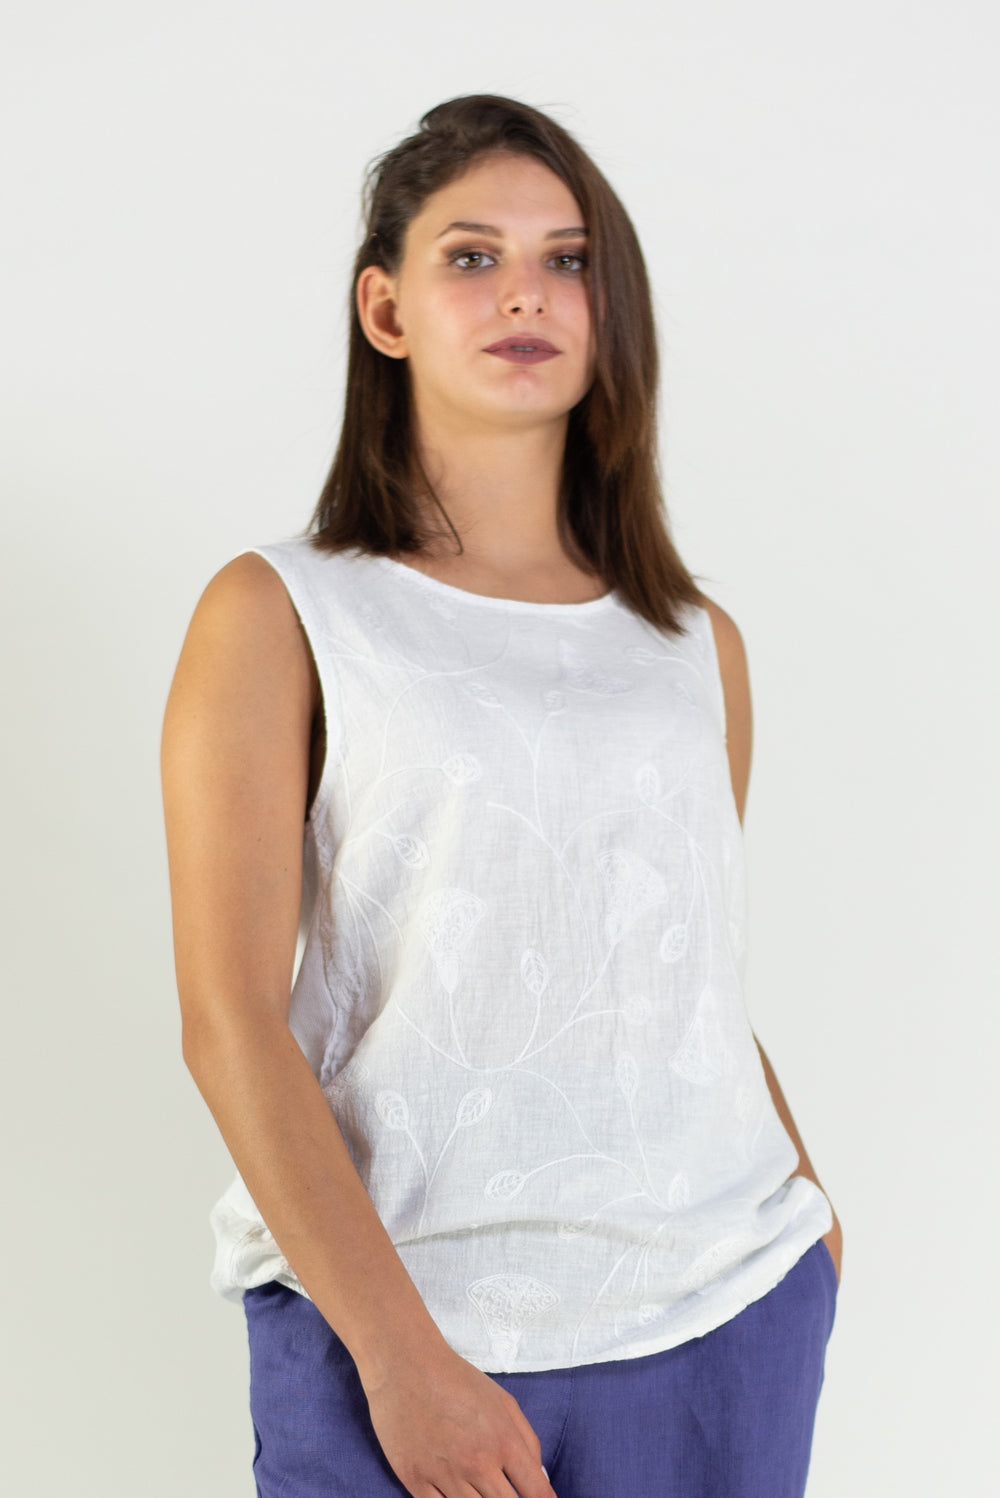 Luca Vanucci tank, linen embroidery white